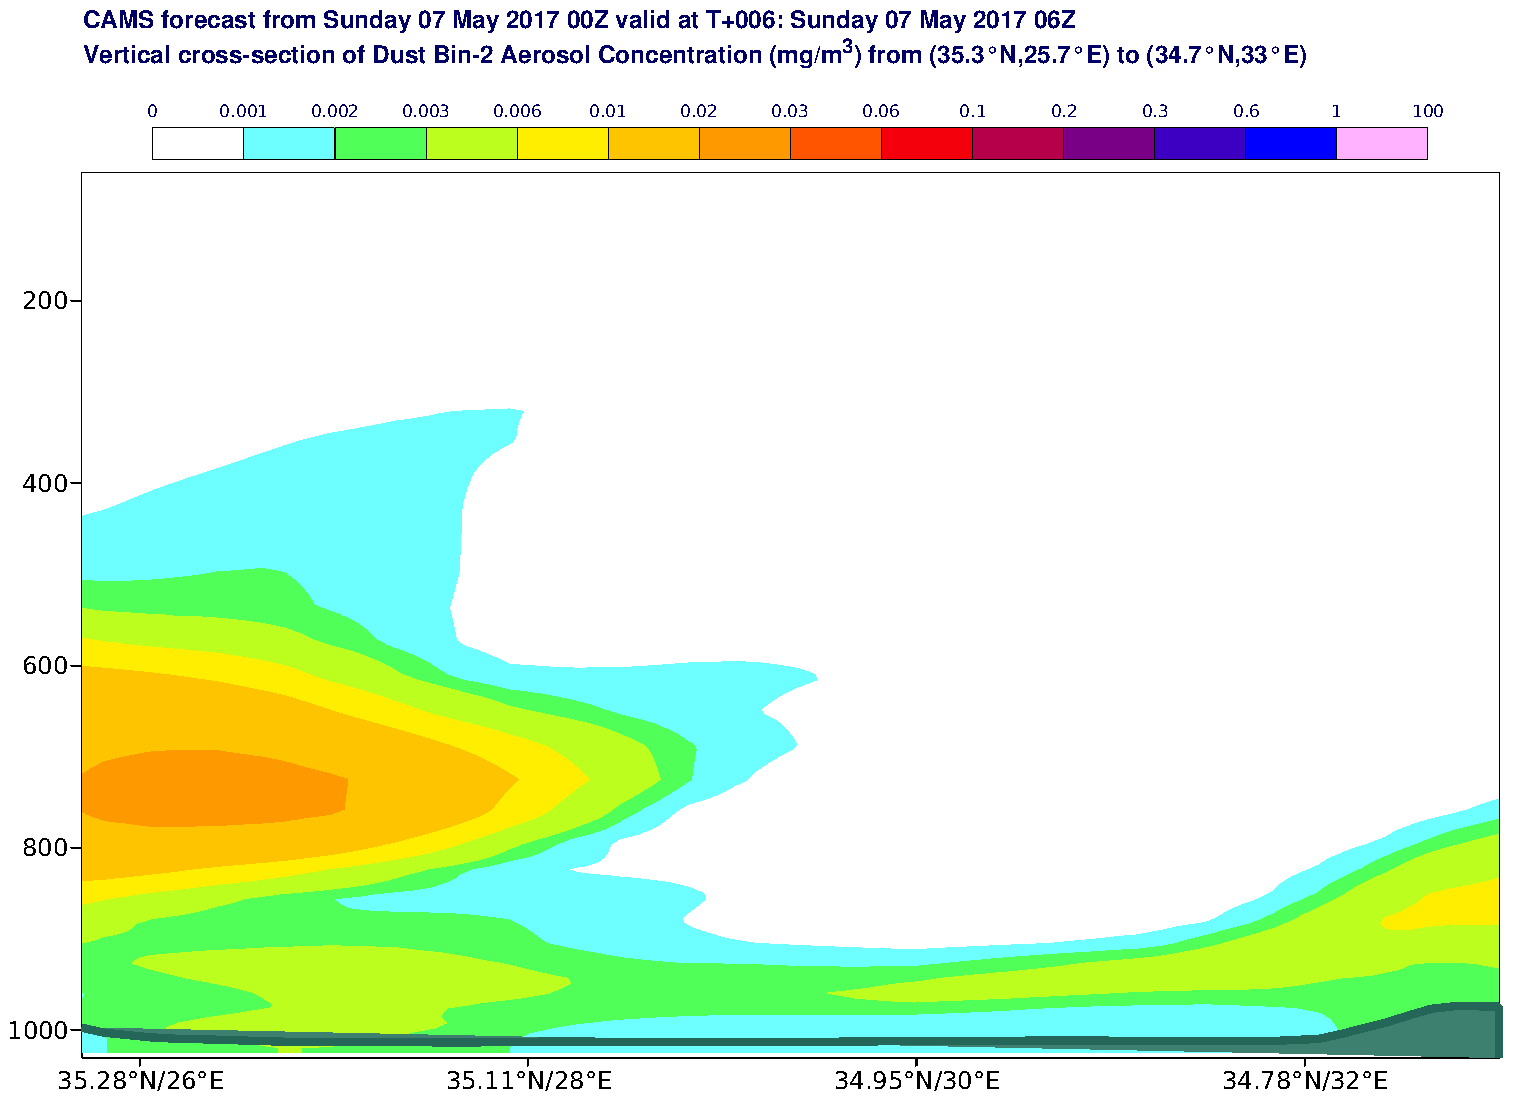 Vertical cross-section of Dust Bin-2 Aerosol Concentration (mg/m3) valid at T6 - 2017-05-07 06:00